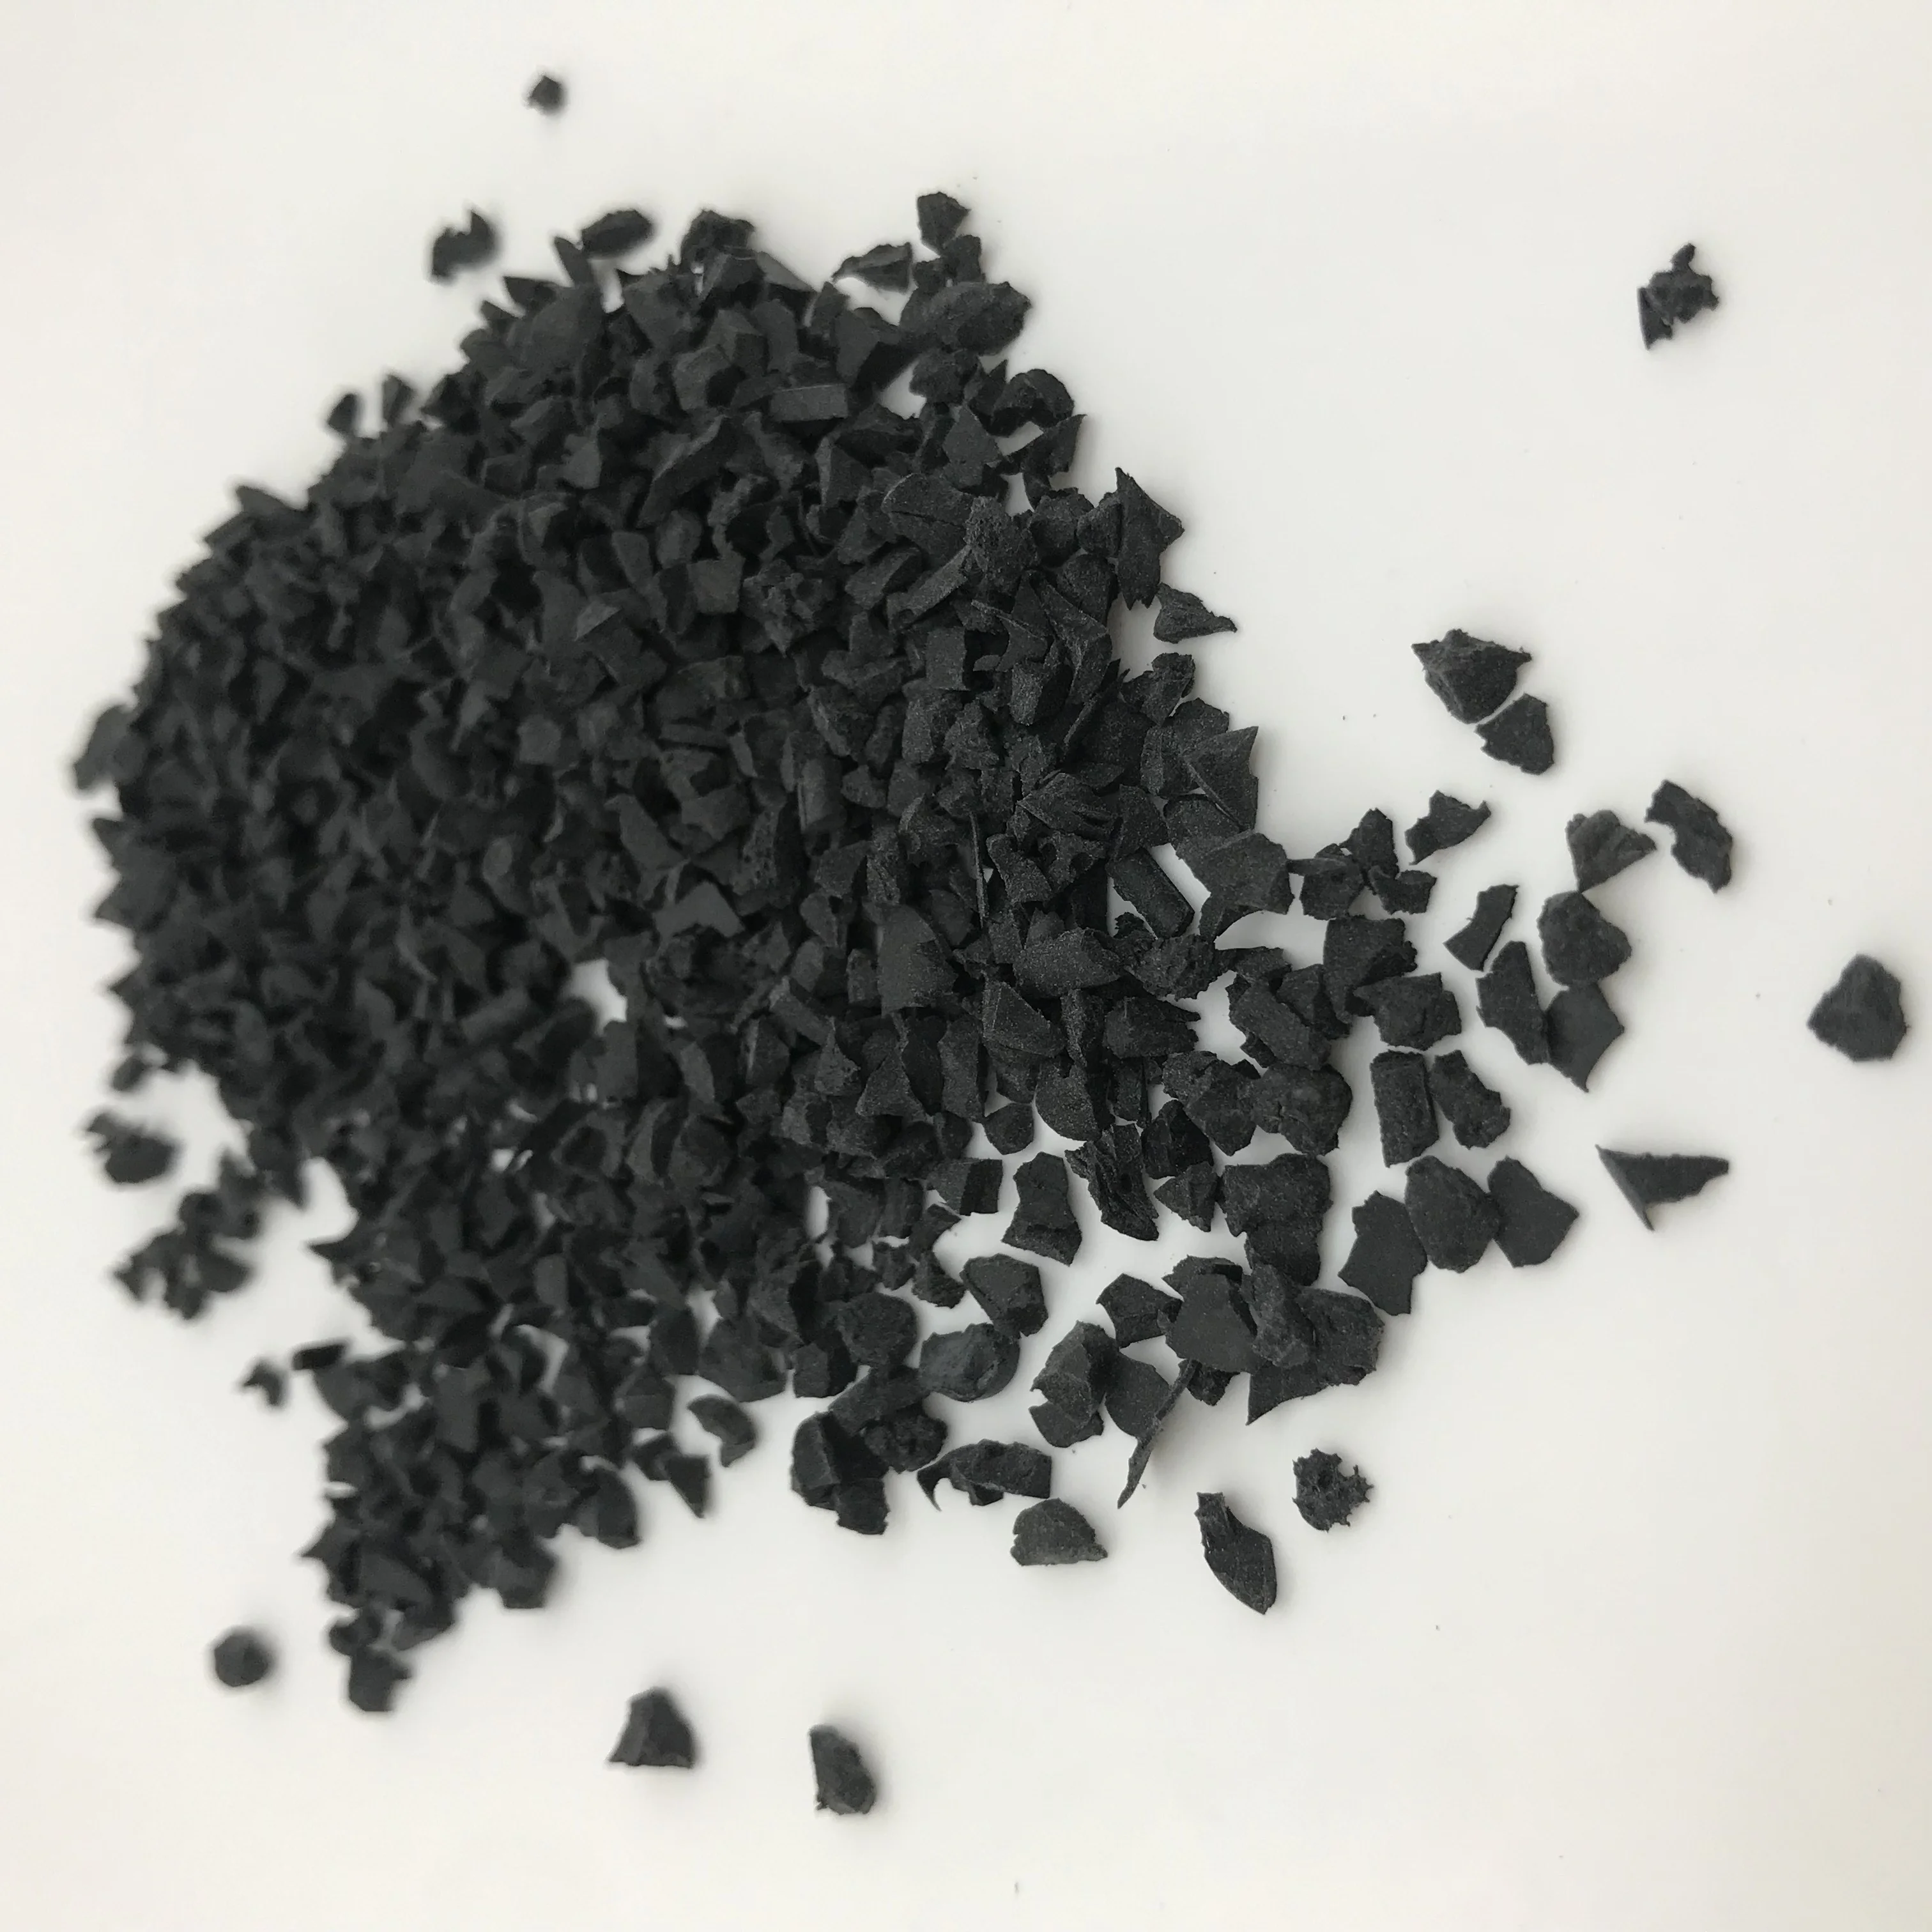 

ENOCH 2-4mm Wholesale Rubber Particles Crumb For Infill Artificial Grass football Field, Black